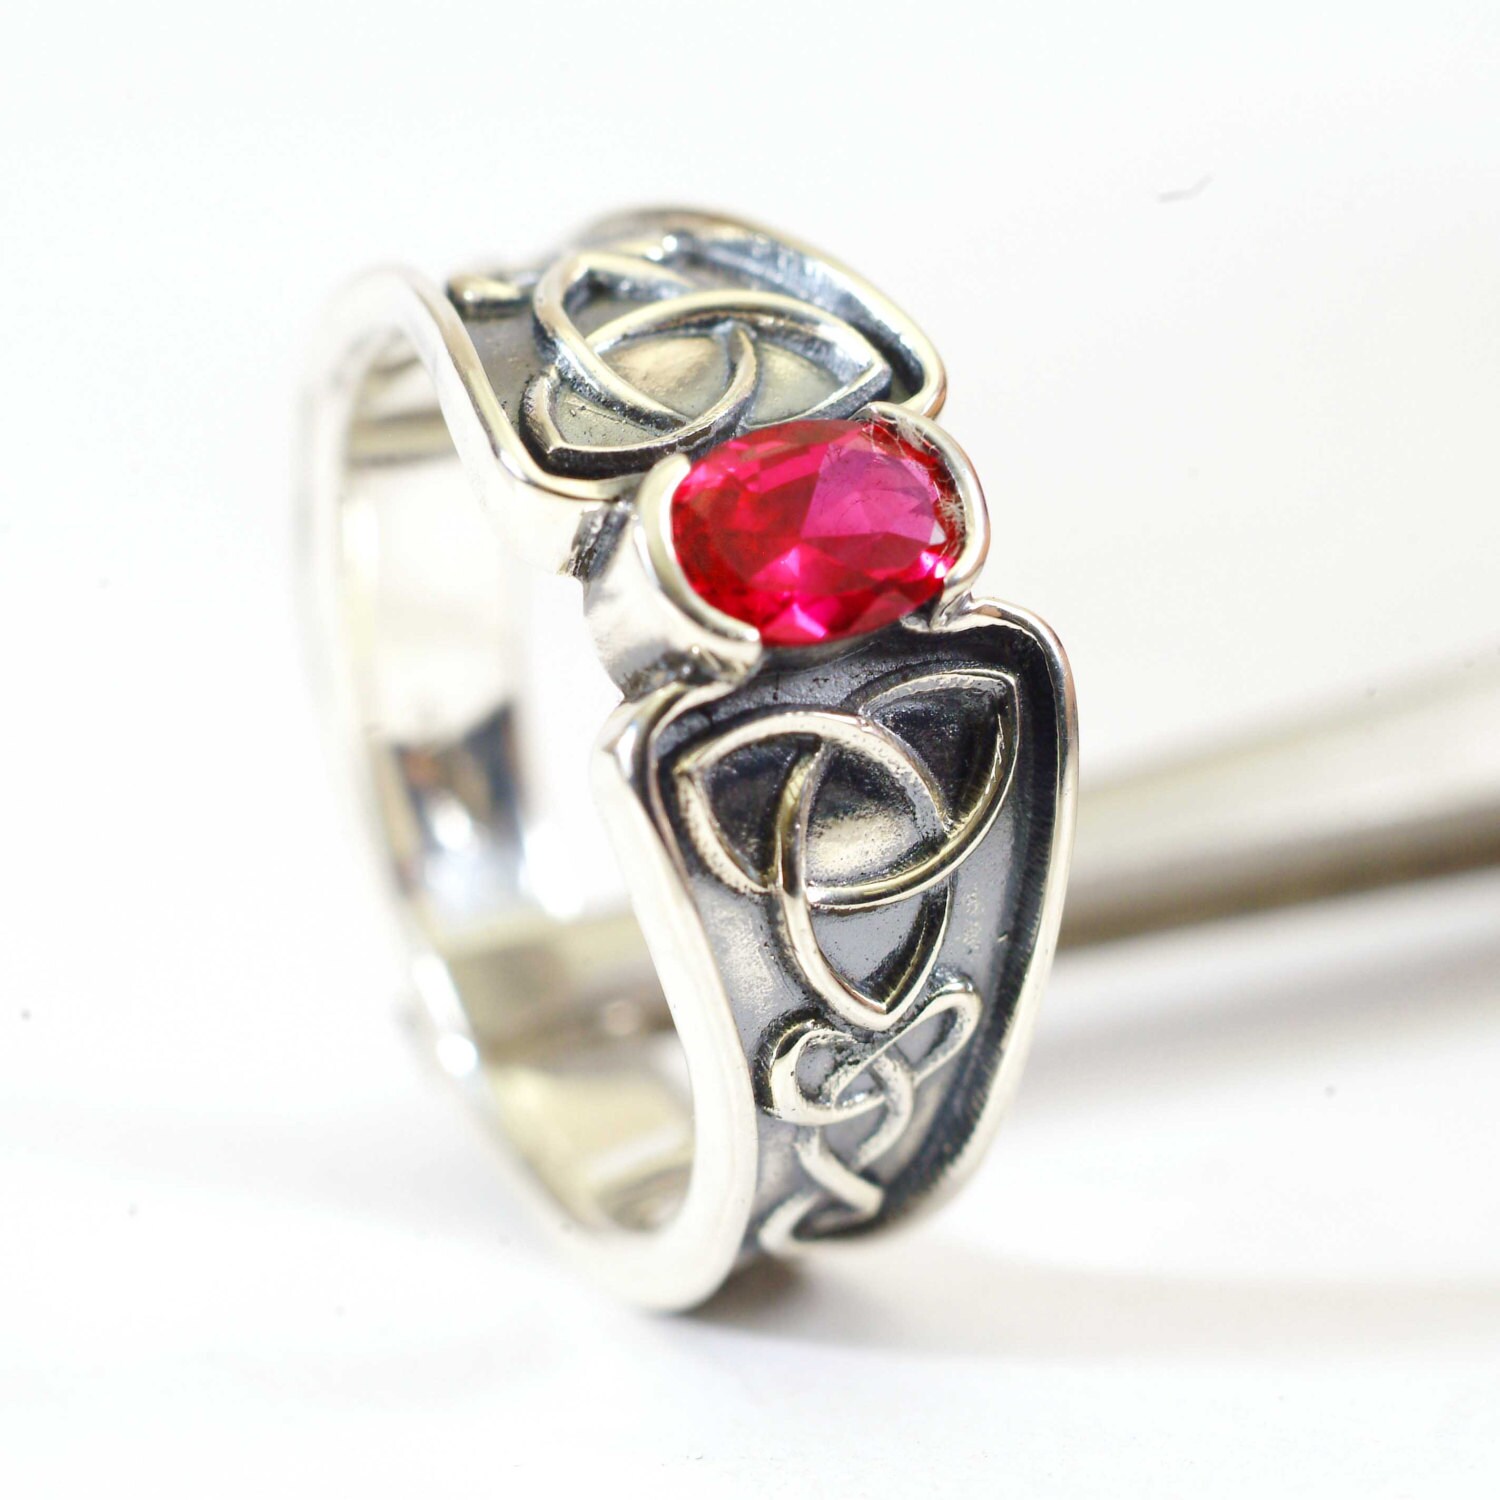 Celtic Ruby Ring With Trinity Interweave Knot by CelticEternity